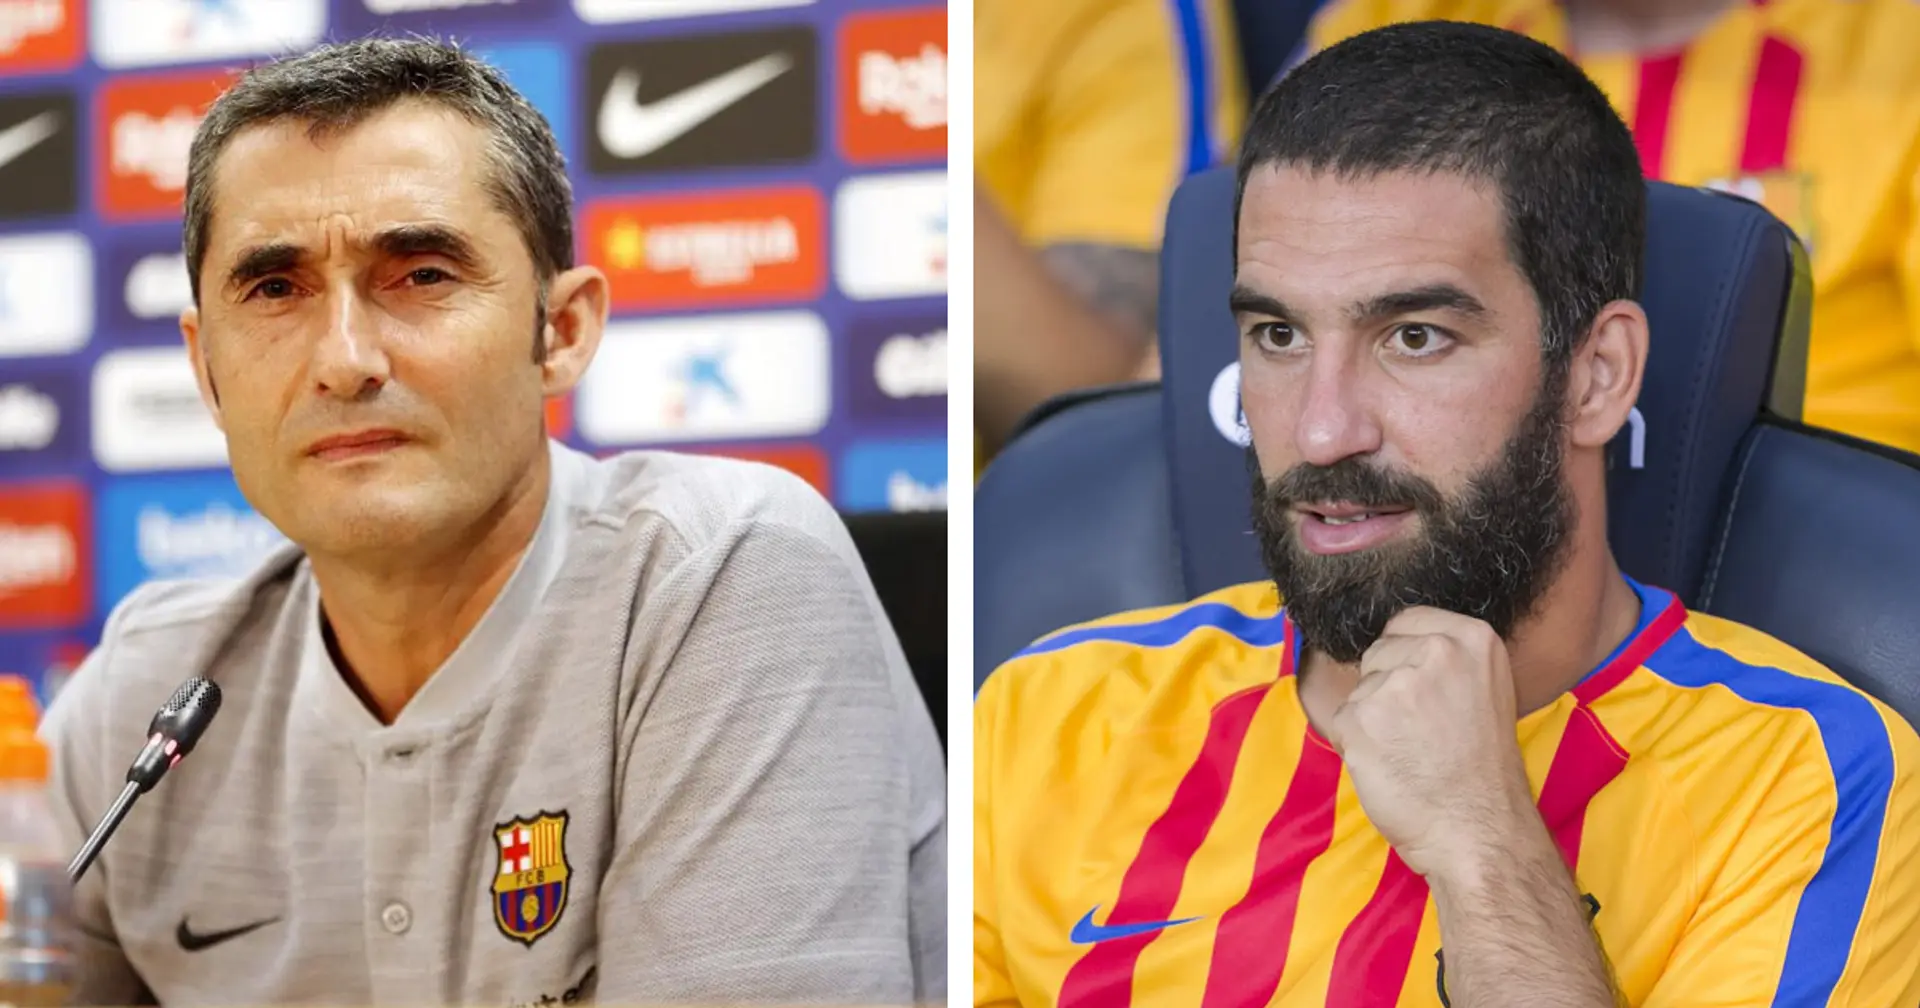 Arda Turan: 'With Valverde, I felt insignificant and decided to leave'